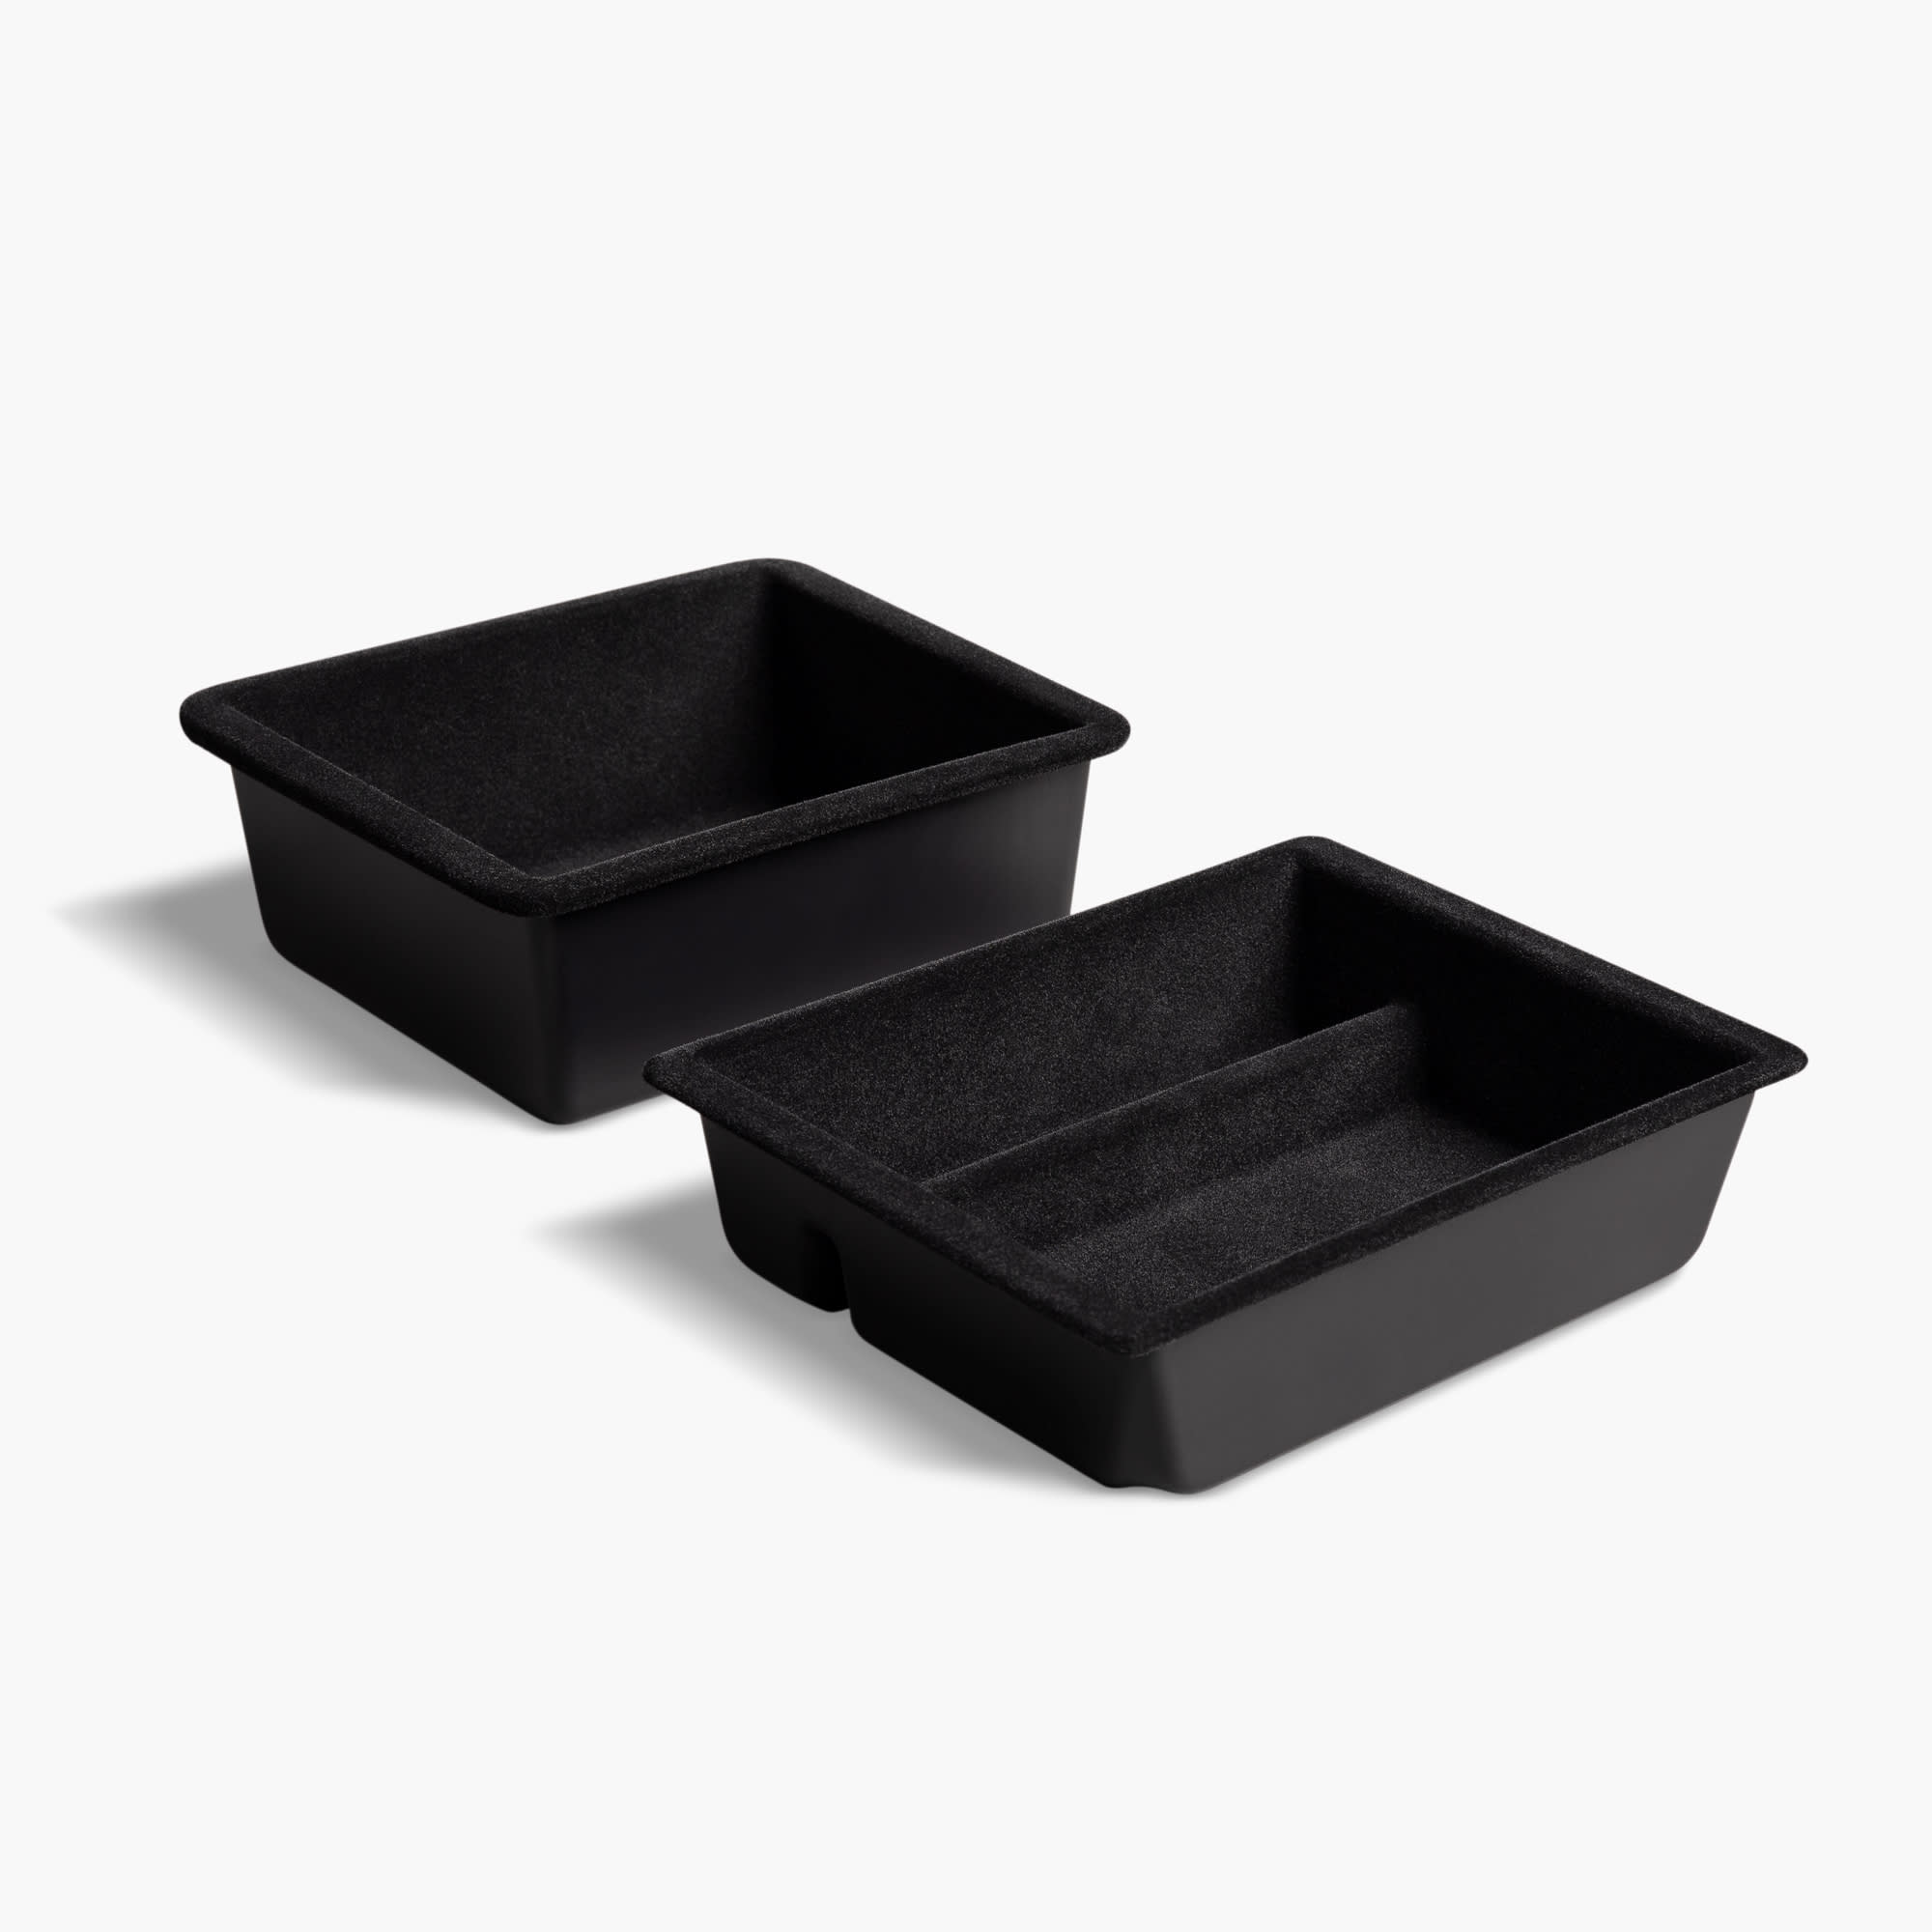 Model 3 Center Console Trays